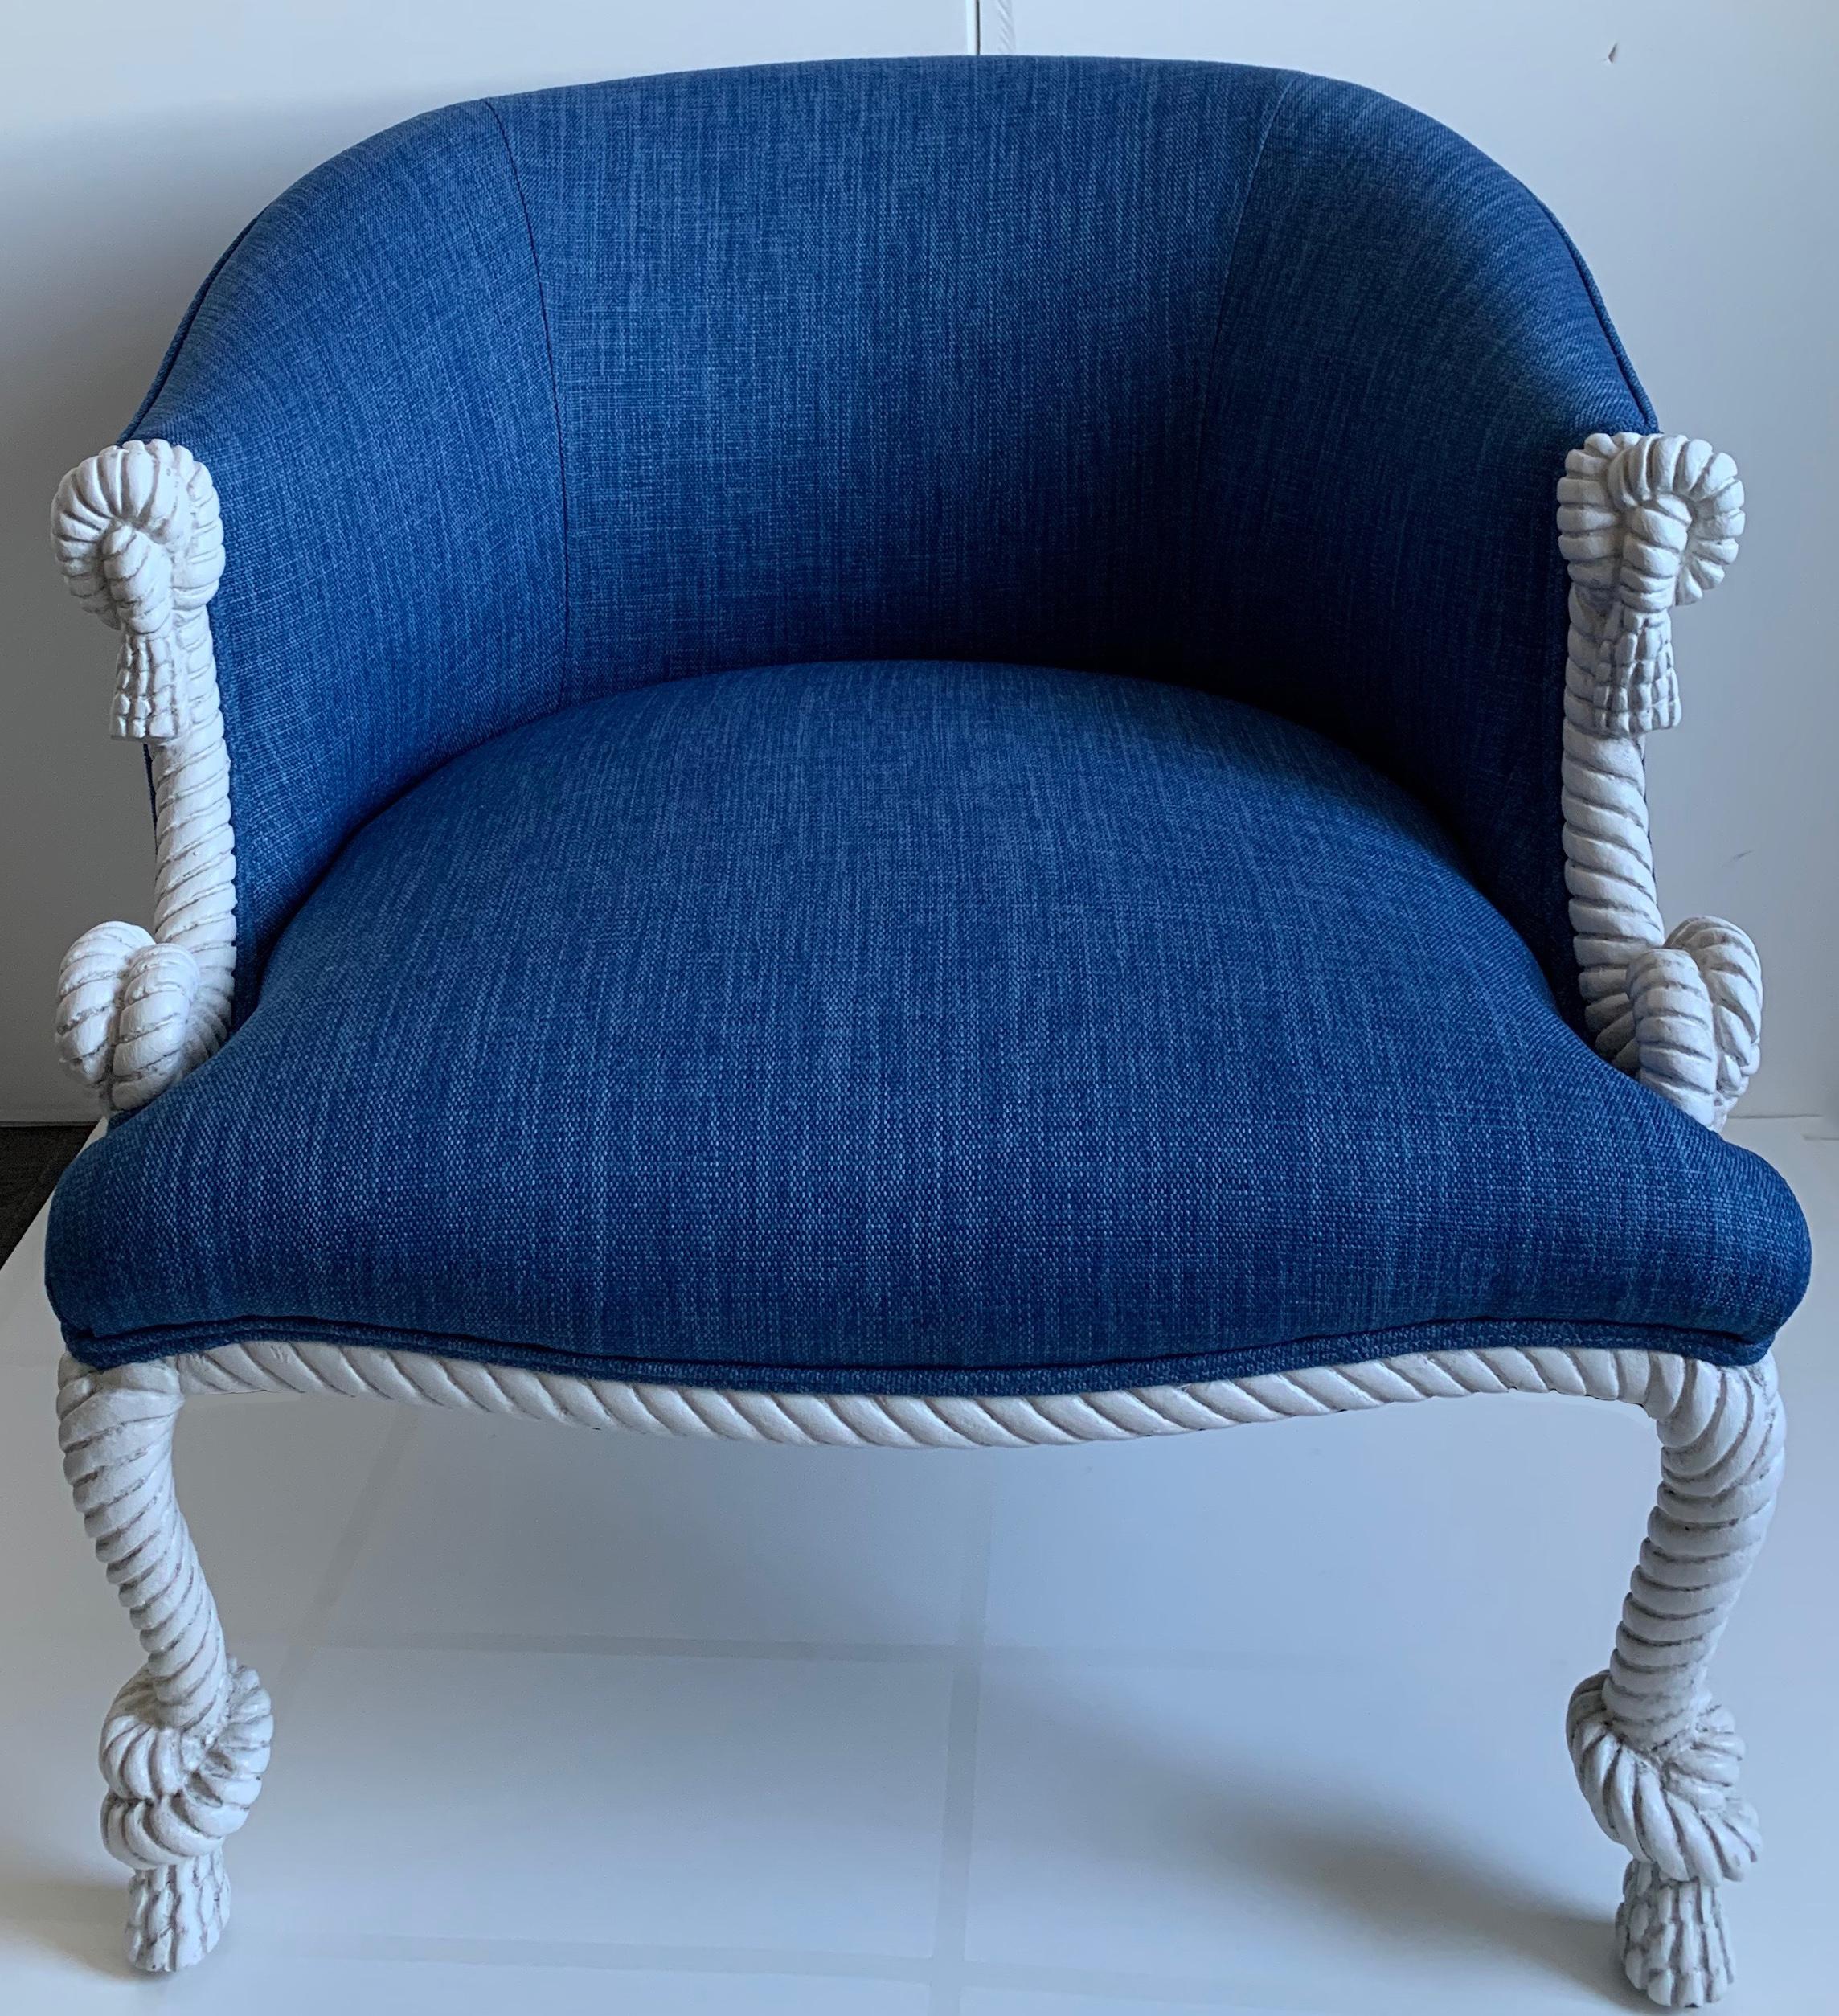 Pair of 1940s carved rope motif armchairs. Newly refinished in antique white painted finish. Chair frame is carved wood with simulated rope motif. Knot and tassel detailing at arms and feet. Curved back design. Newly upholstered in marine blue